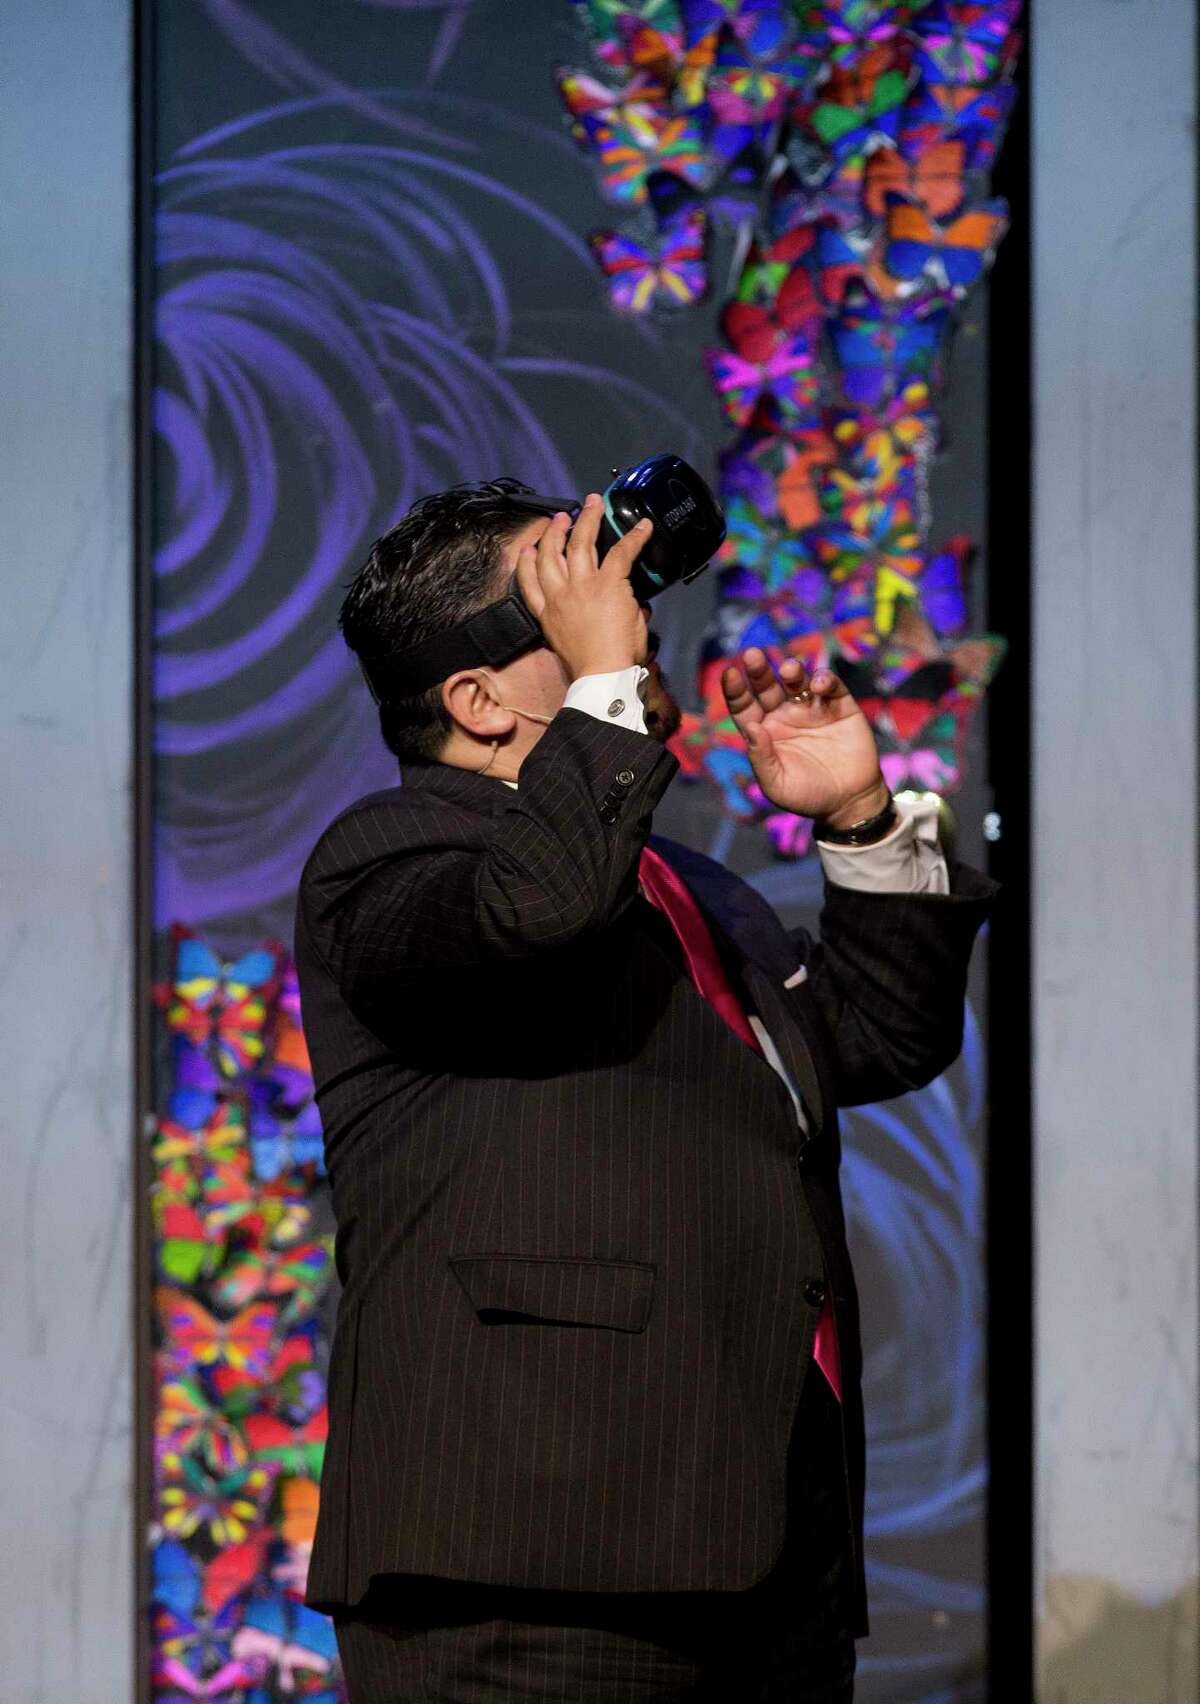 HISD Superintendent Richard Carranza uses virtual reality goggles to take a tour of of the districts' schools as he spoke to roughly 1,500 members of Houston's business, non-profit- and faith-based community in attendance for the annual State of the Schools address at Hilton Americas Hotel Thursday, Feb. 15, 2018, in Houston.